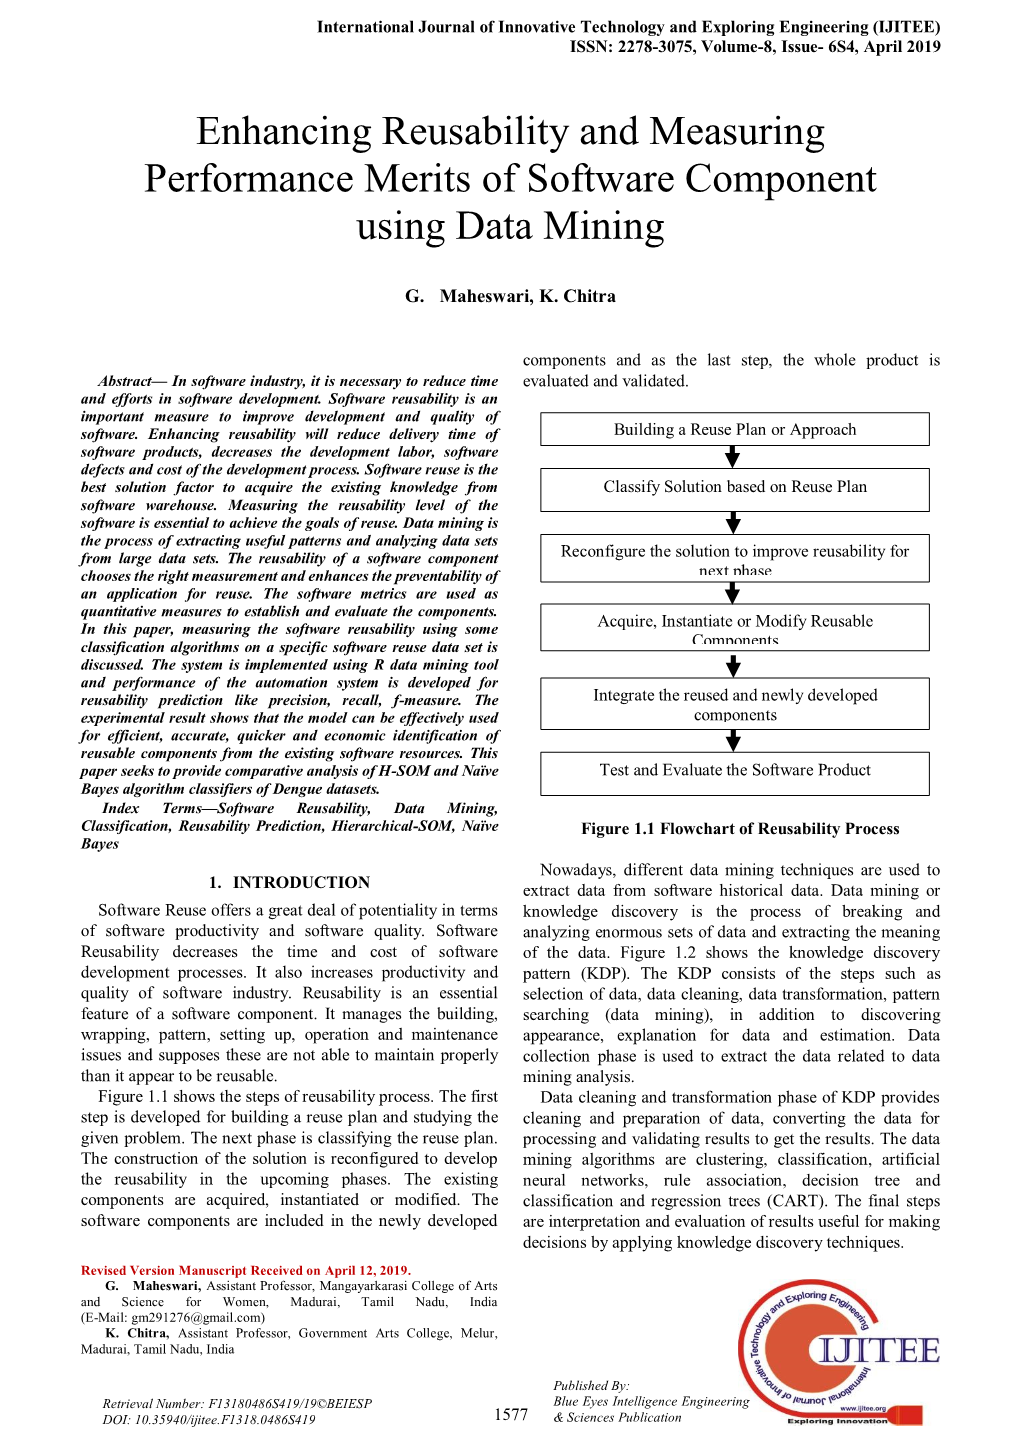 Enhancing Reusability and Measuring Performance Merits of Software Component Using Data Mining